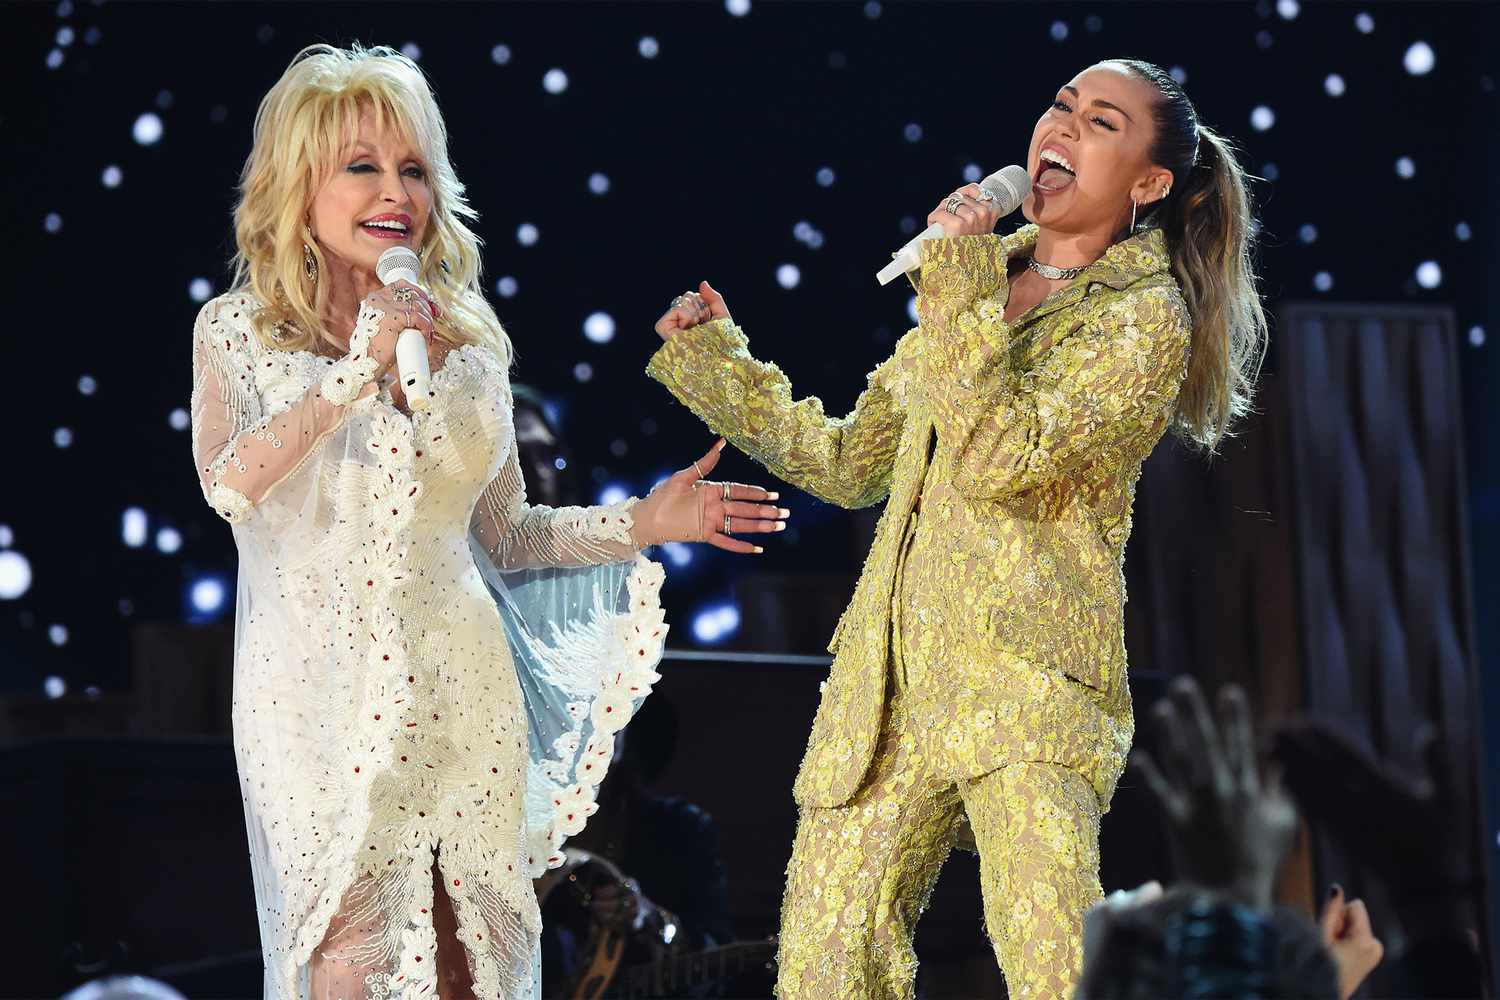 LOS ANGELES, CA - FEBRUARY 10: Dolly Parton (L) and Miley Cyrus perform onstage during the 61st Annual GRAMMY Awards at Staples Center on February 10, 2019 in Los Angeles, California. (Photo by Kevin Mazur/Getty Images for The Recording Academy)